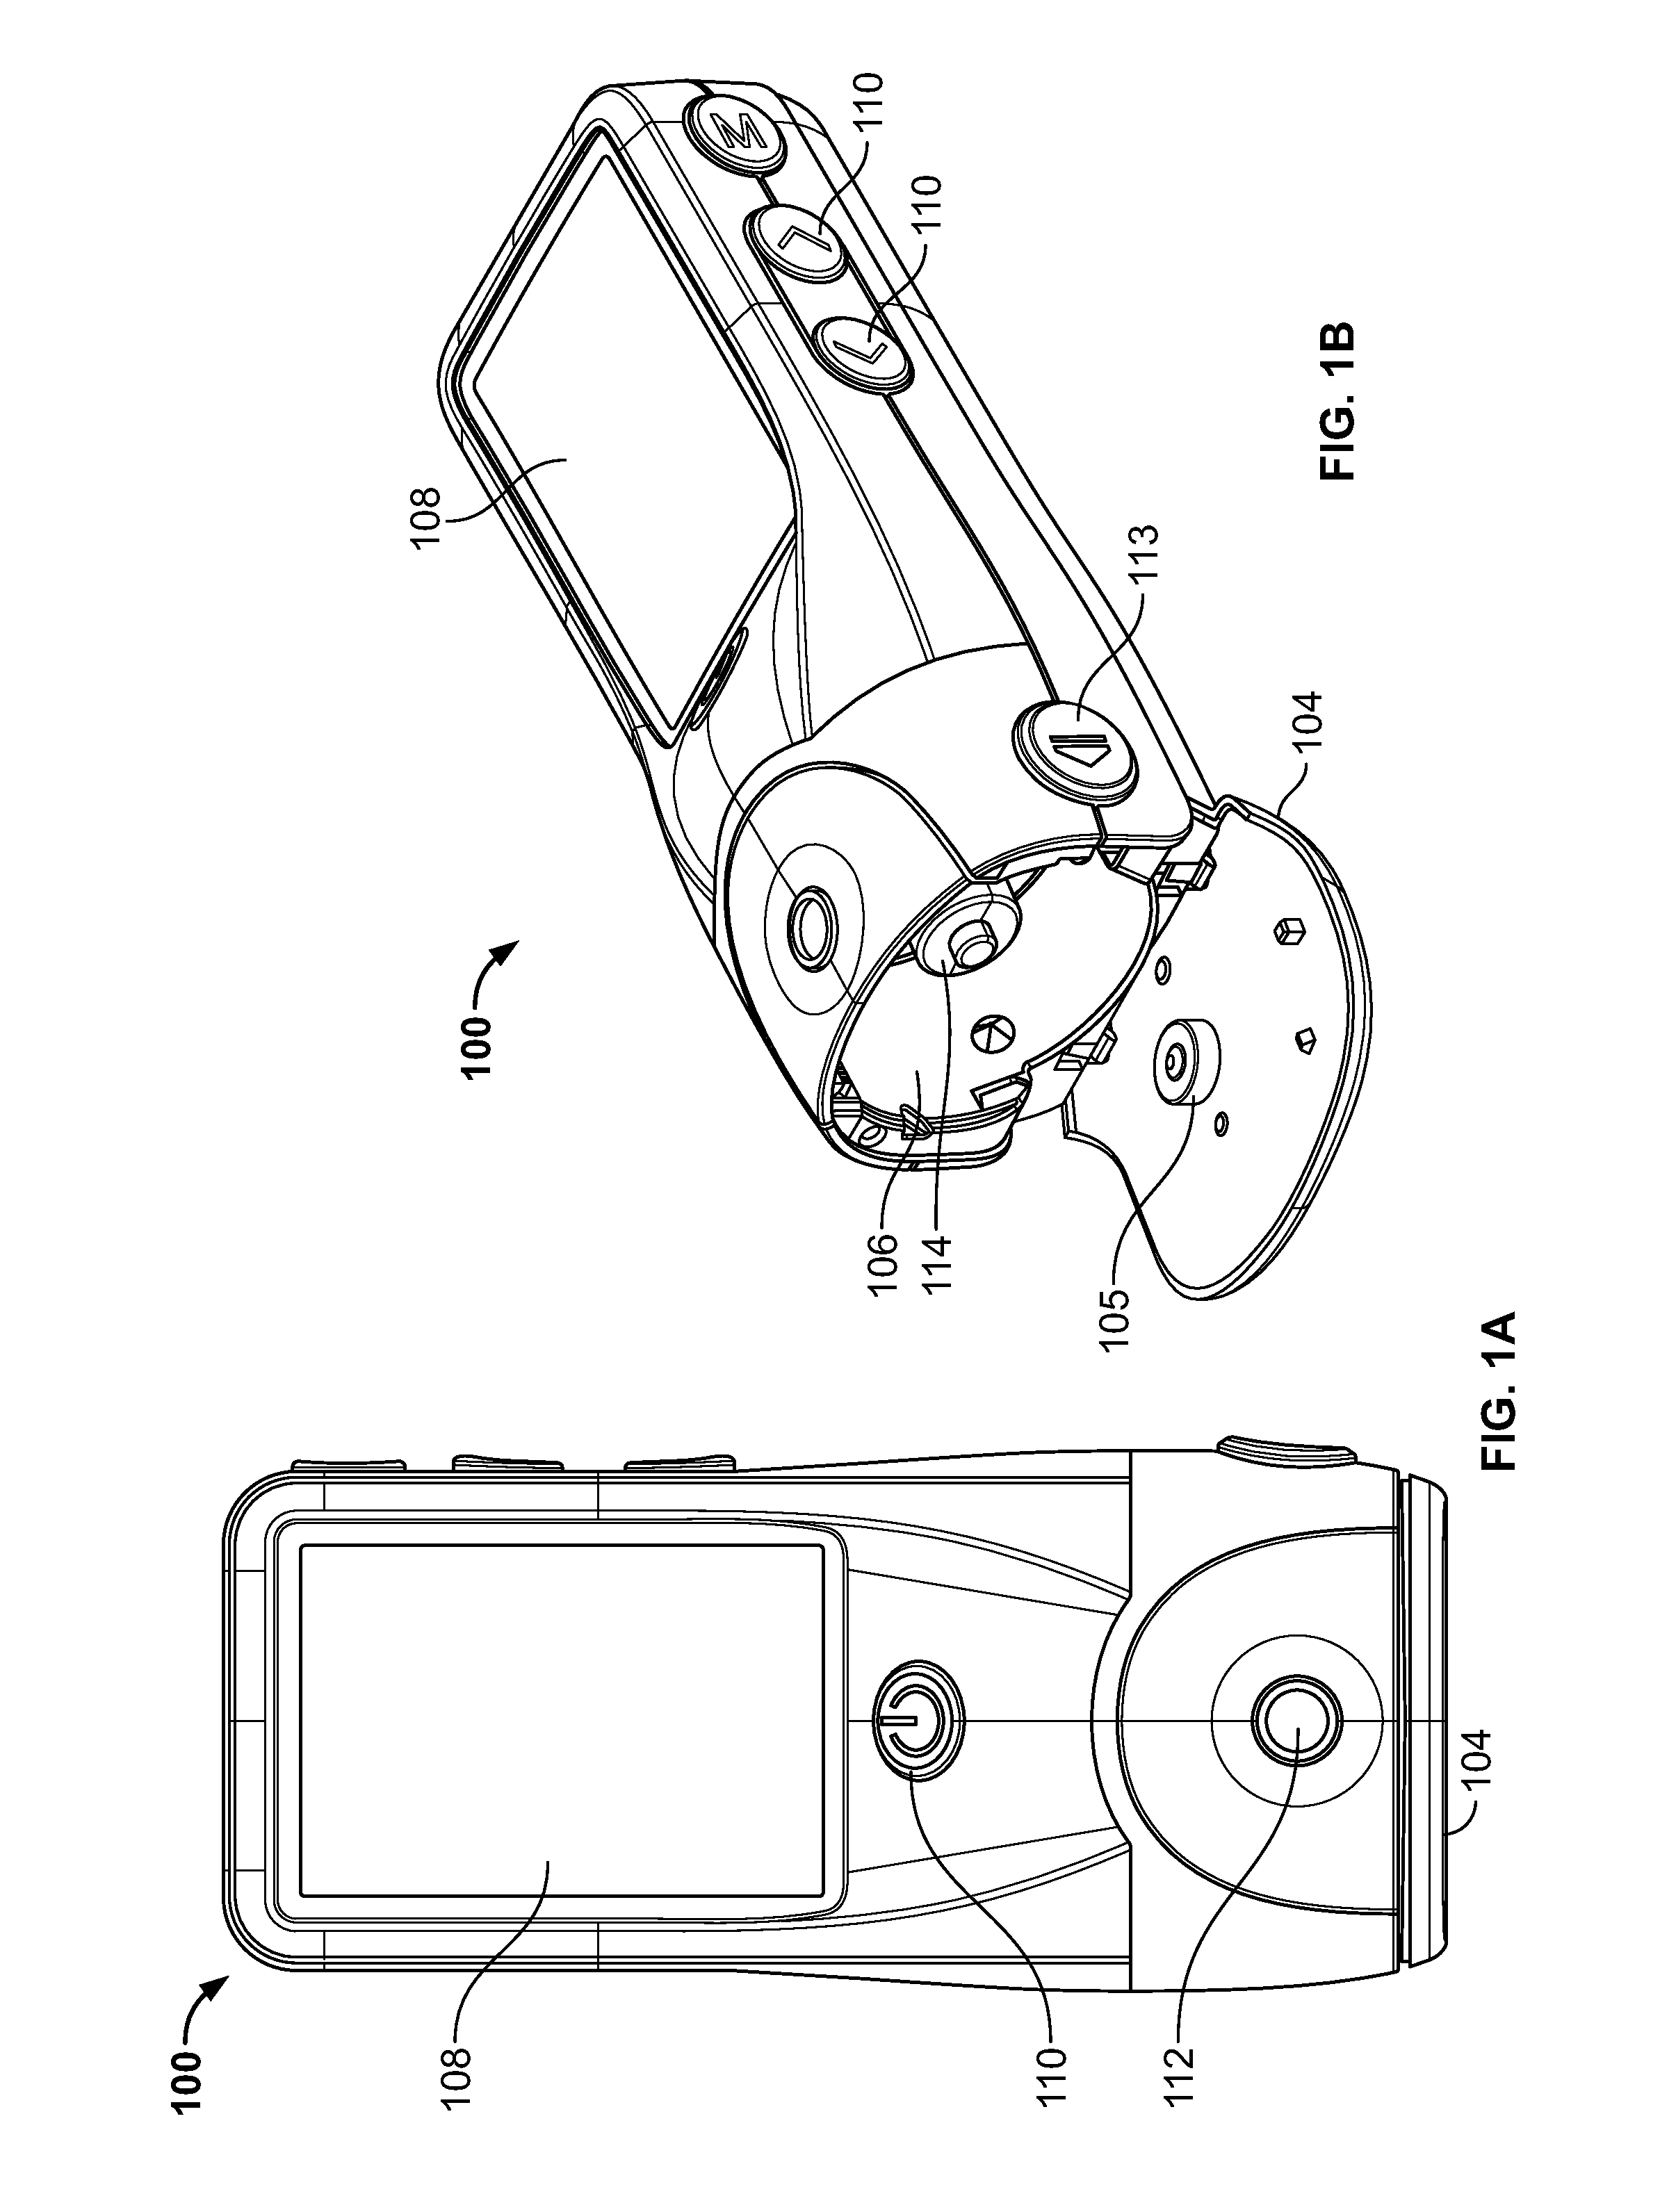 Devices and methods for body fluid sampling and analysis